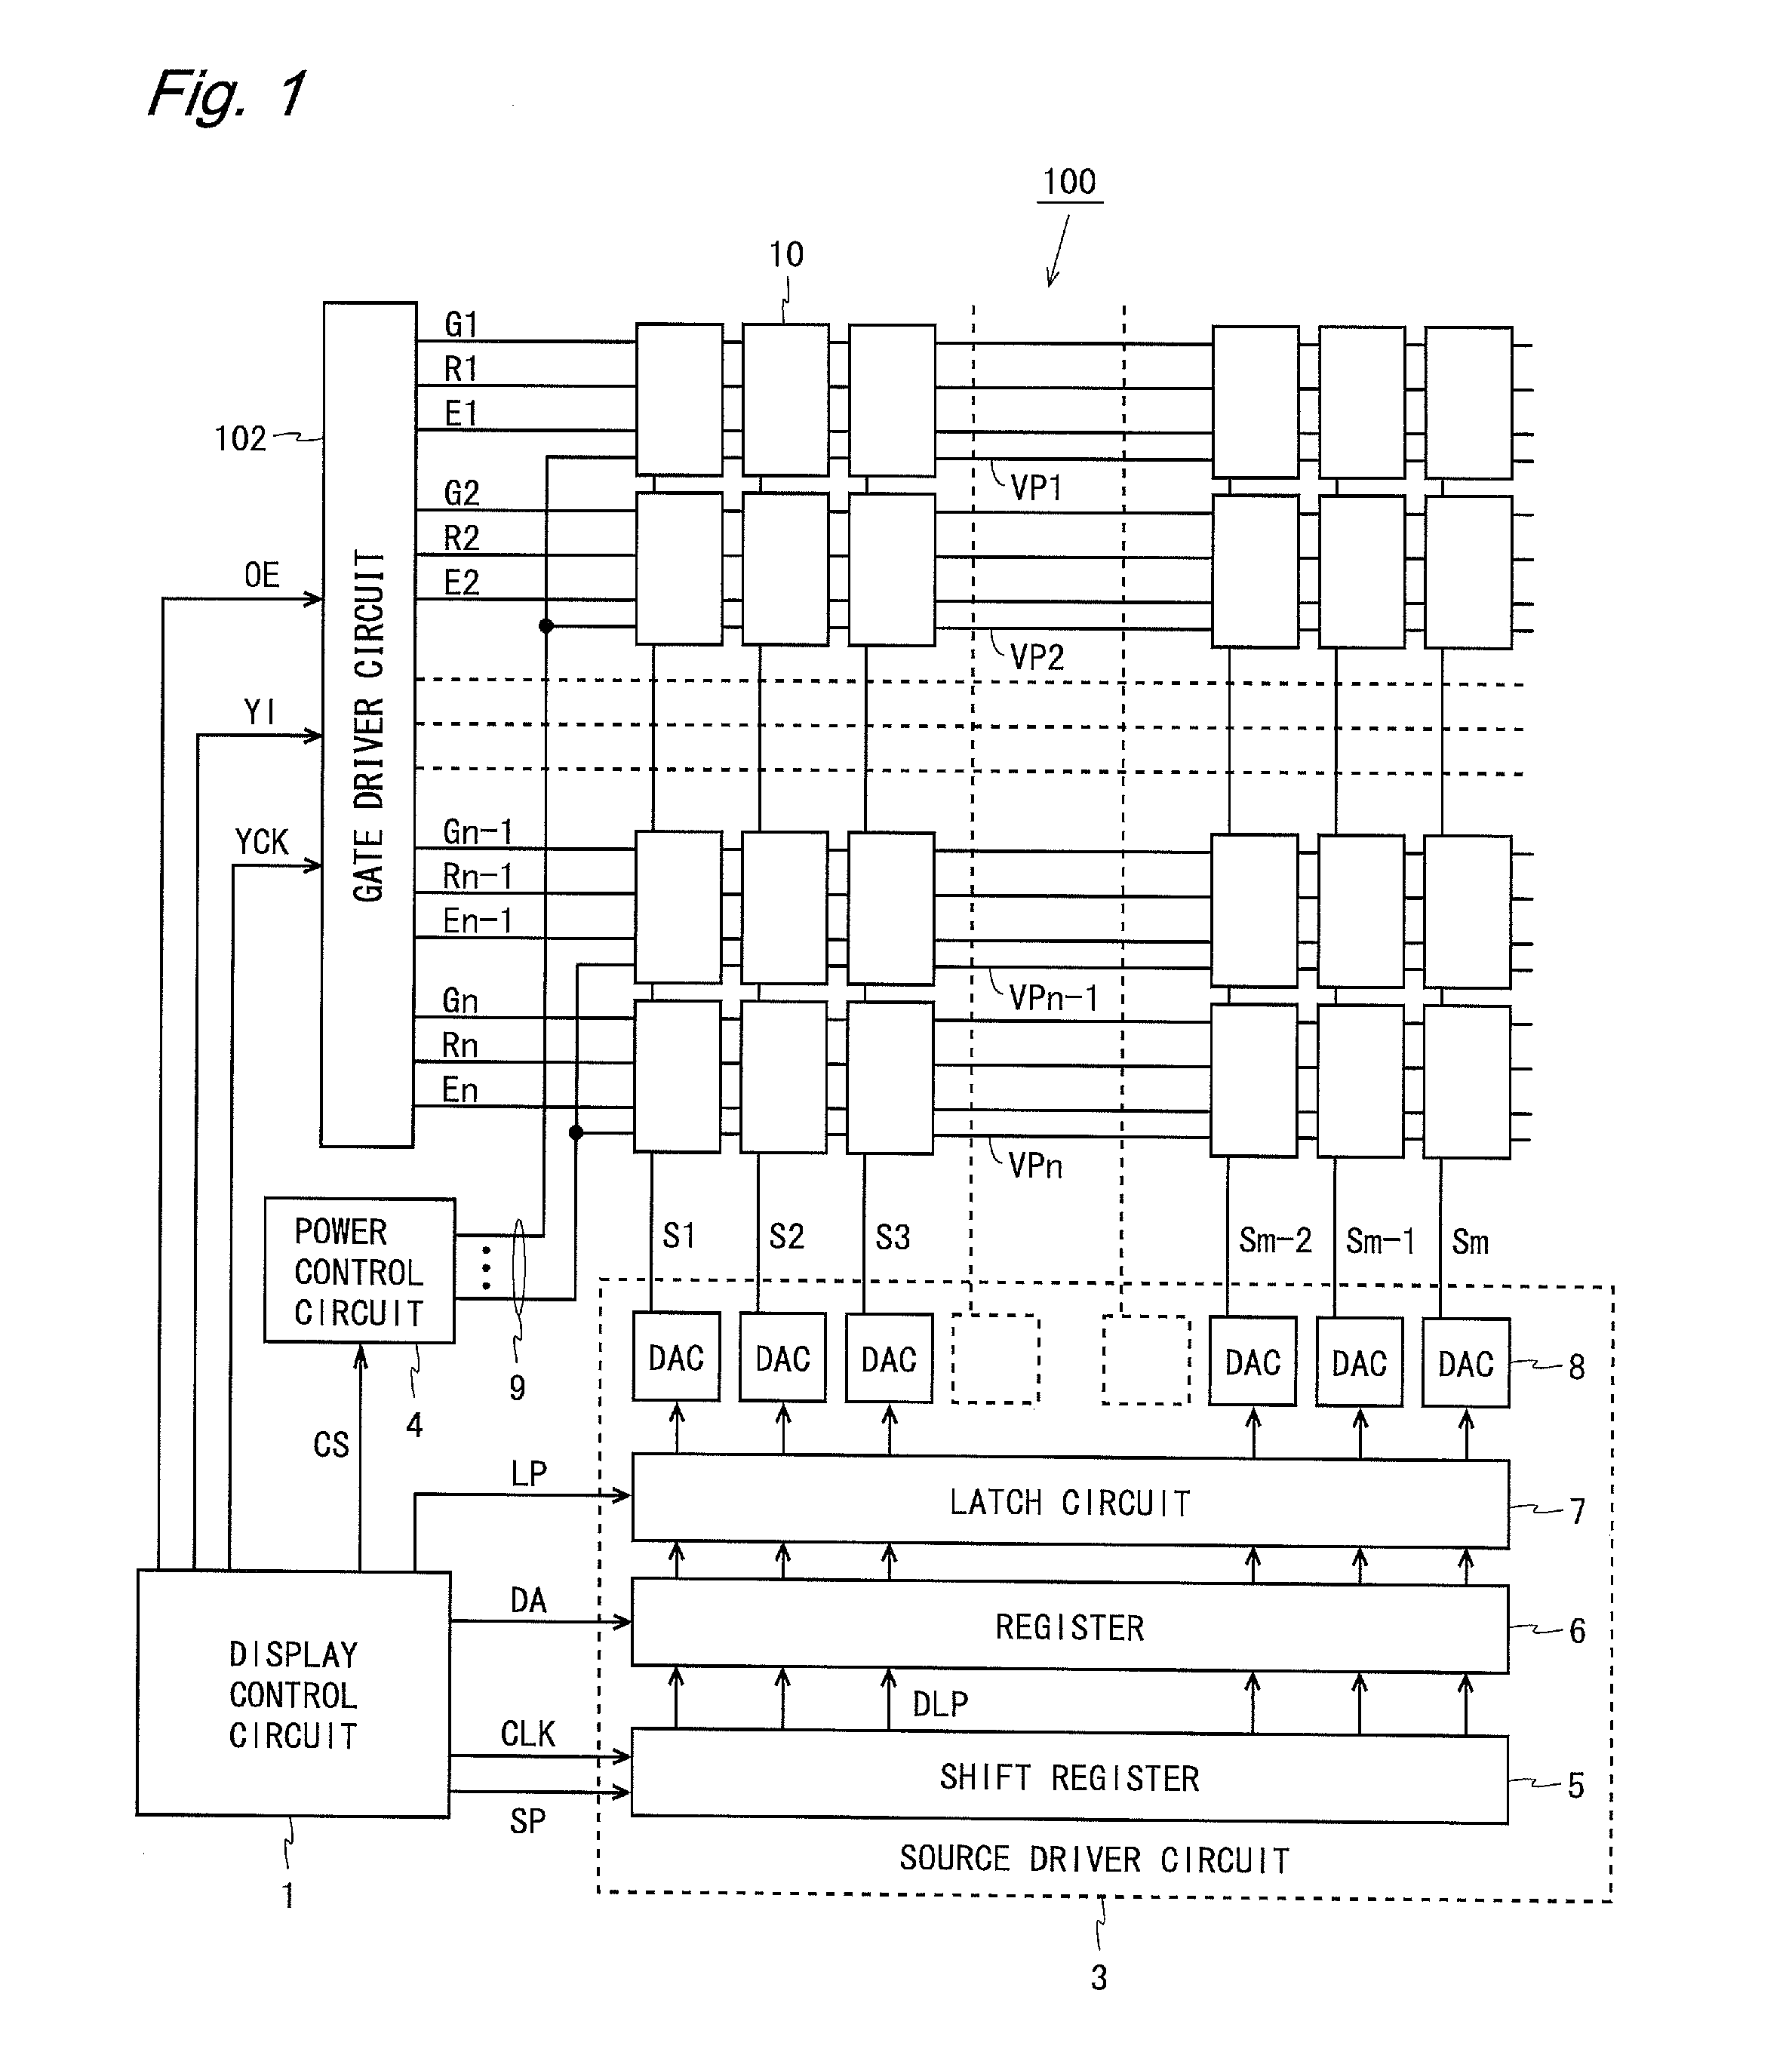 Display device and drive method therefor